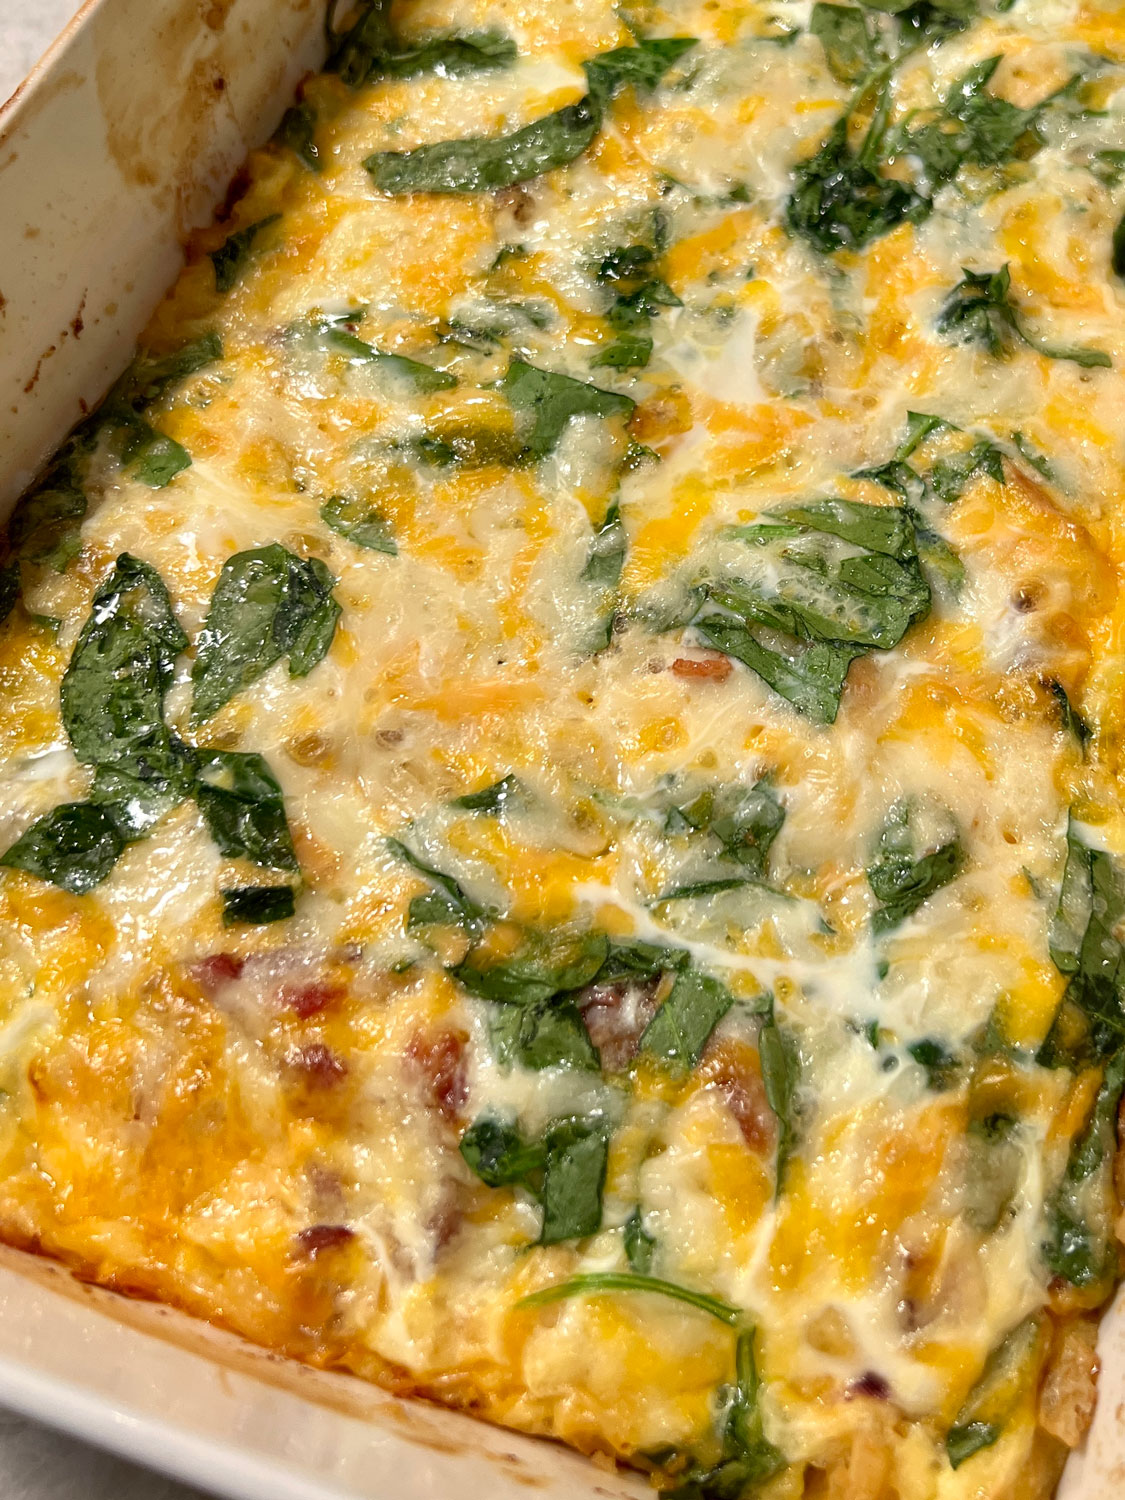 Egg and Saltine casserole with chopped Spinach